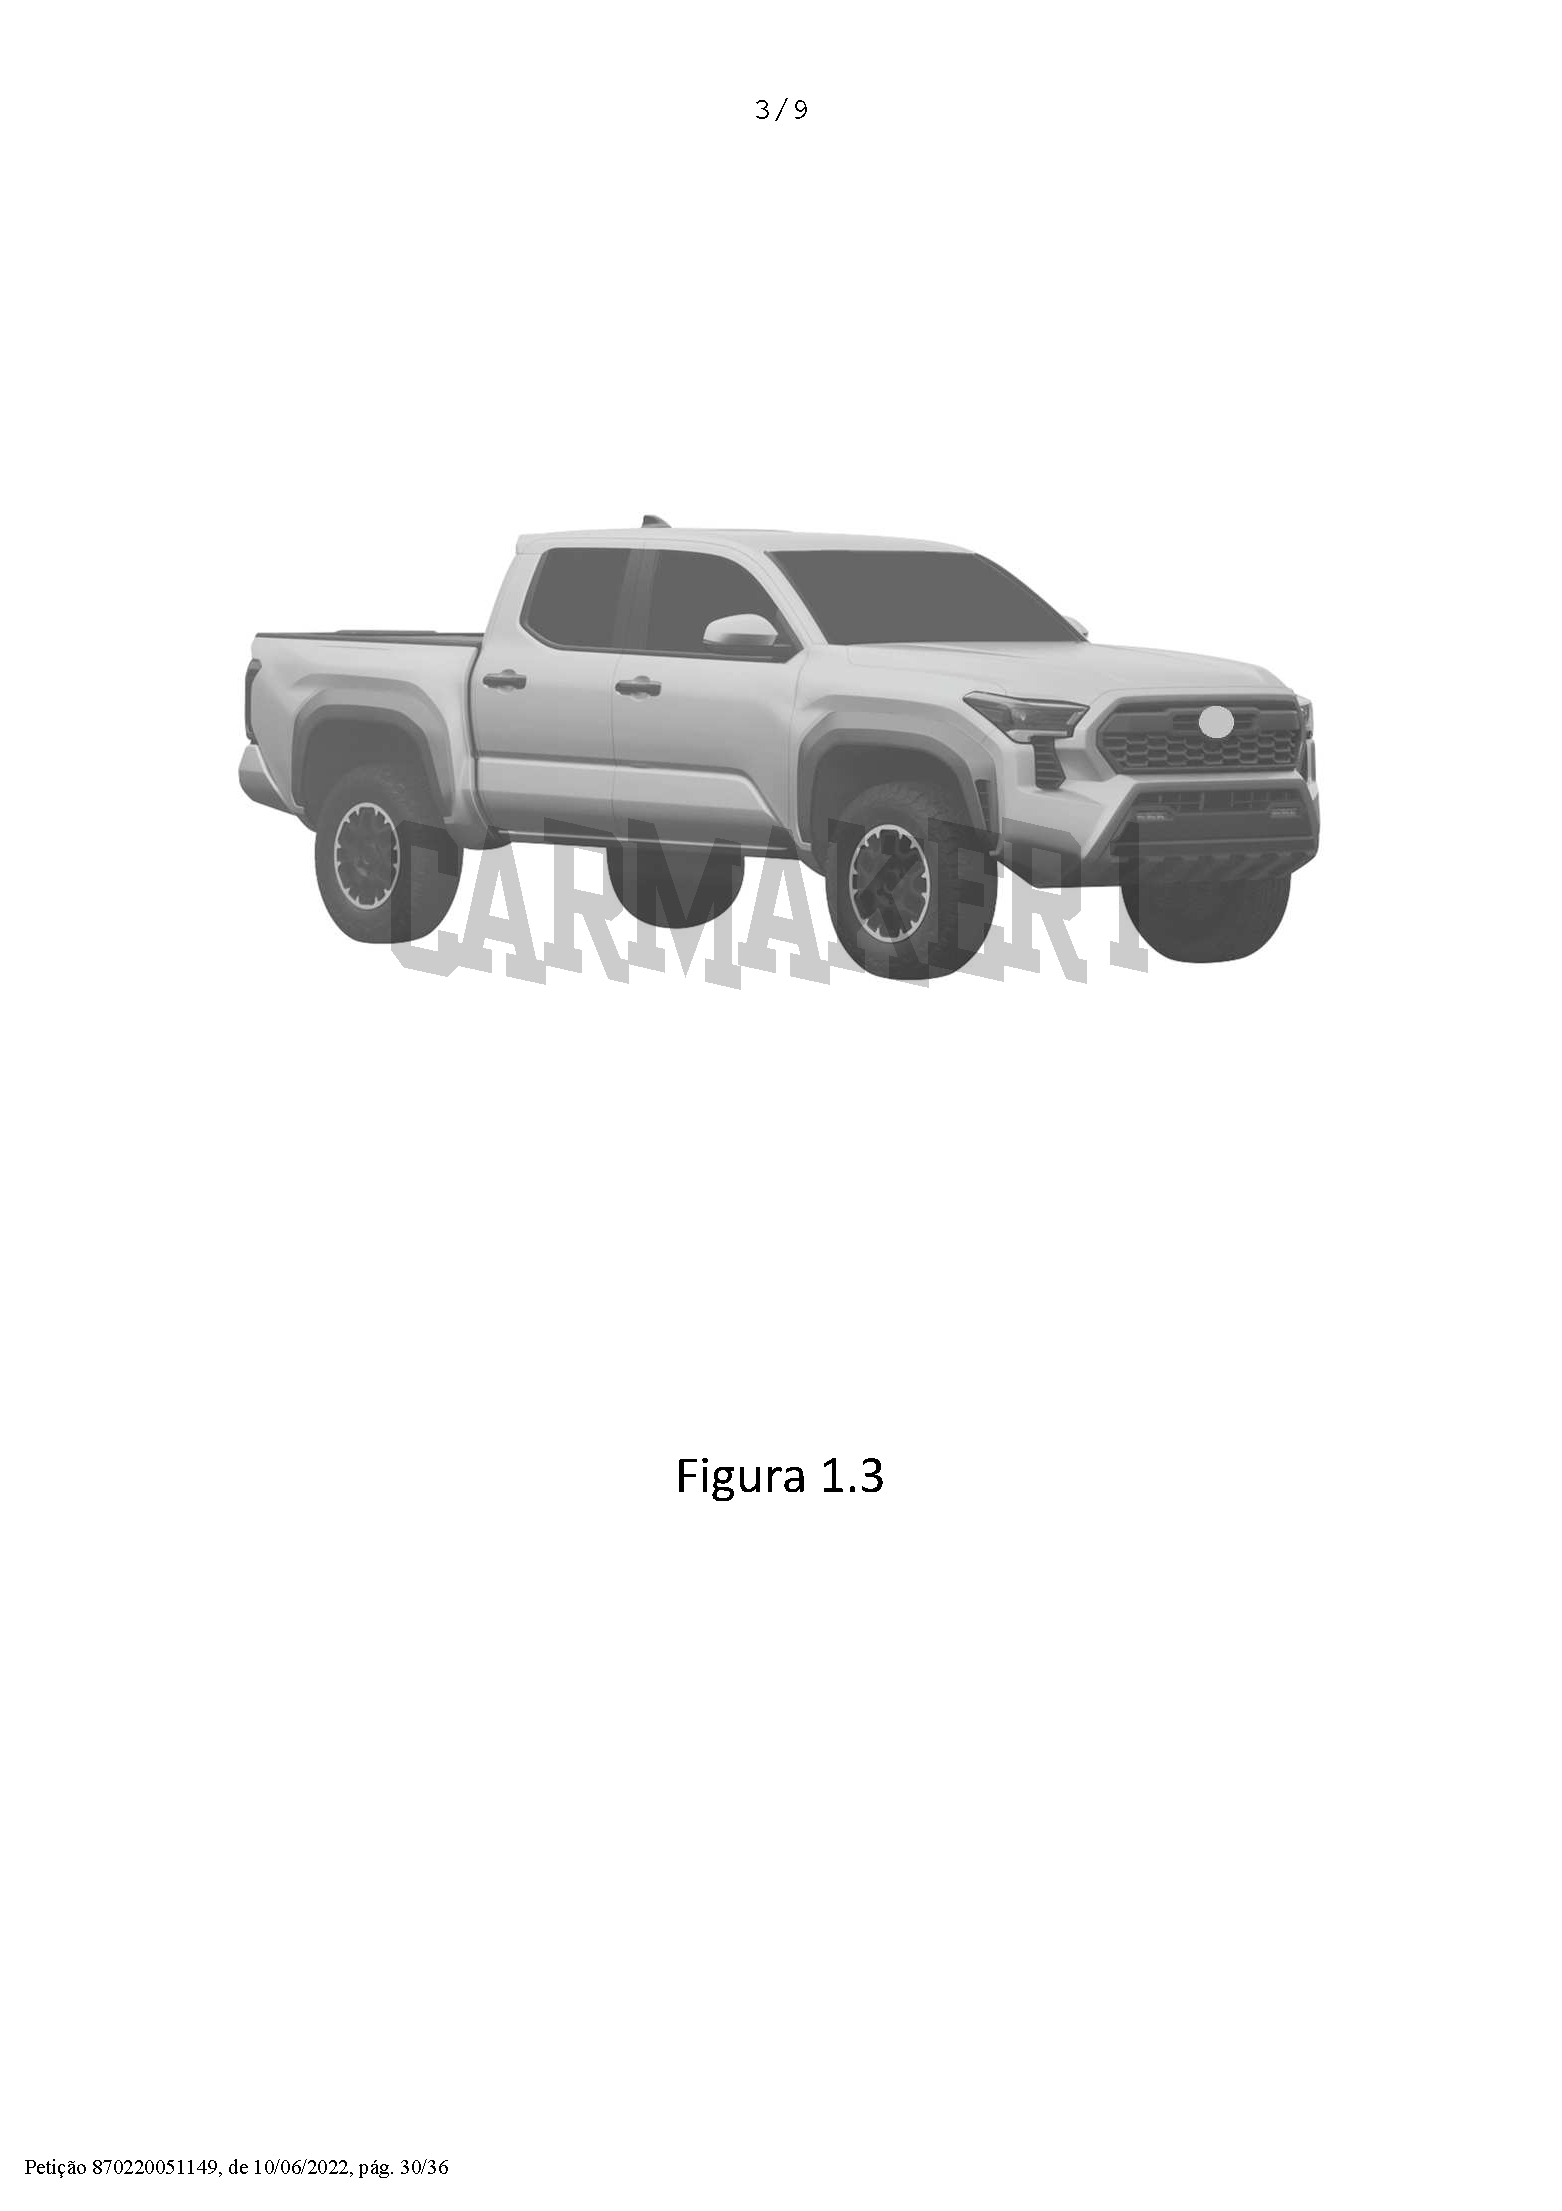 2024 Tacoma 2024 Tacoma Design Images Revealed in Patent! 📸 🕵🏻‍♂️ 302022003011_Page_06